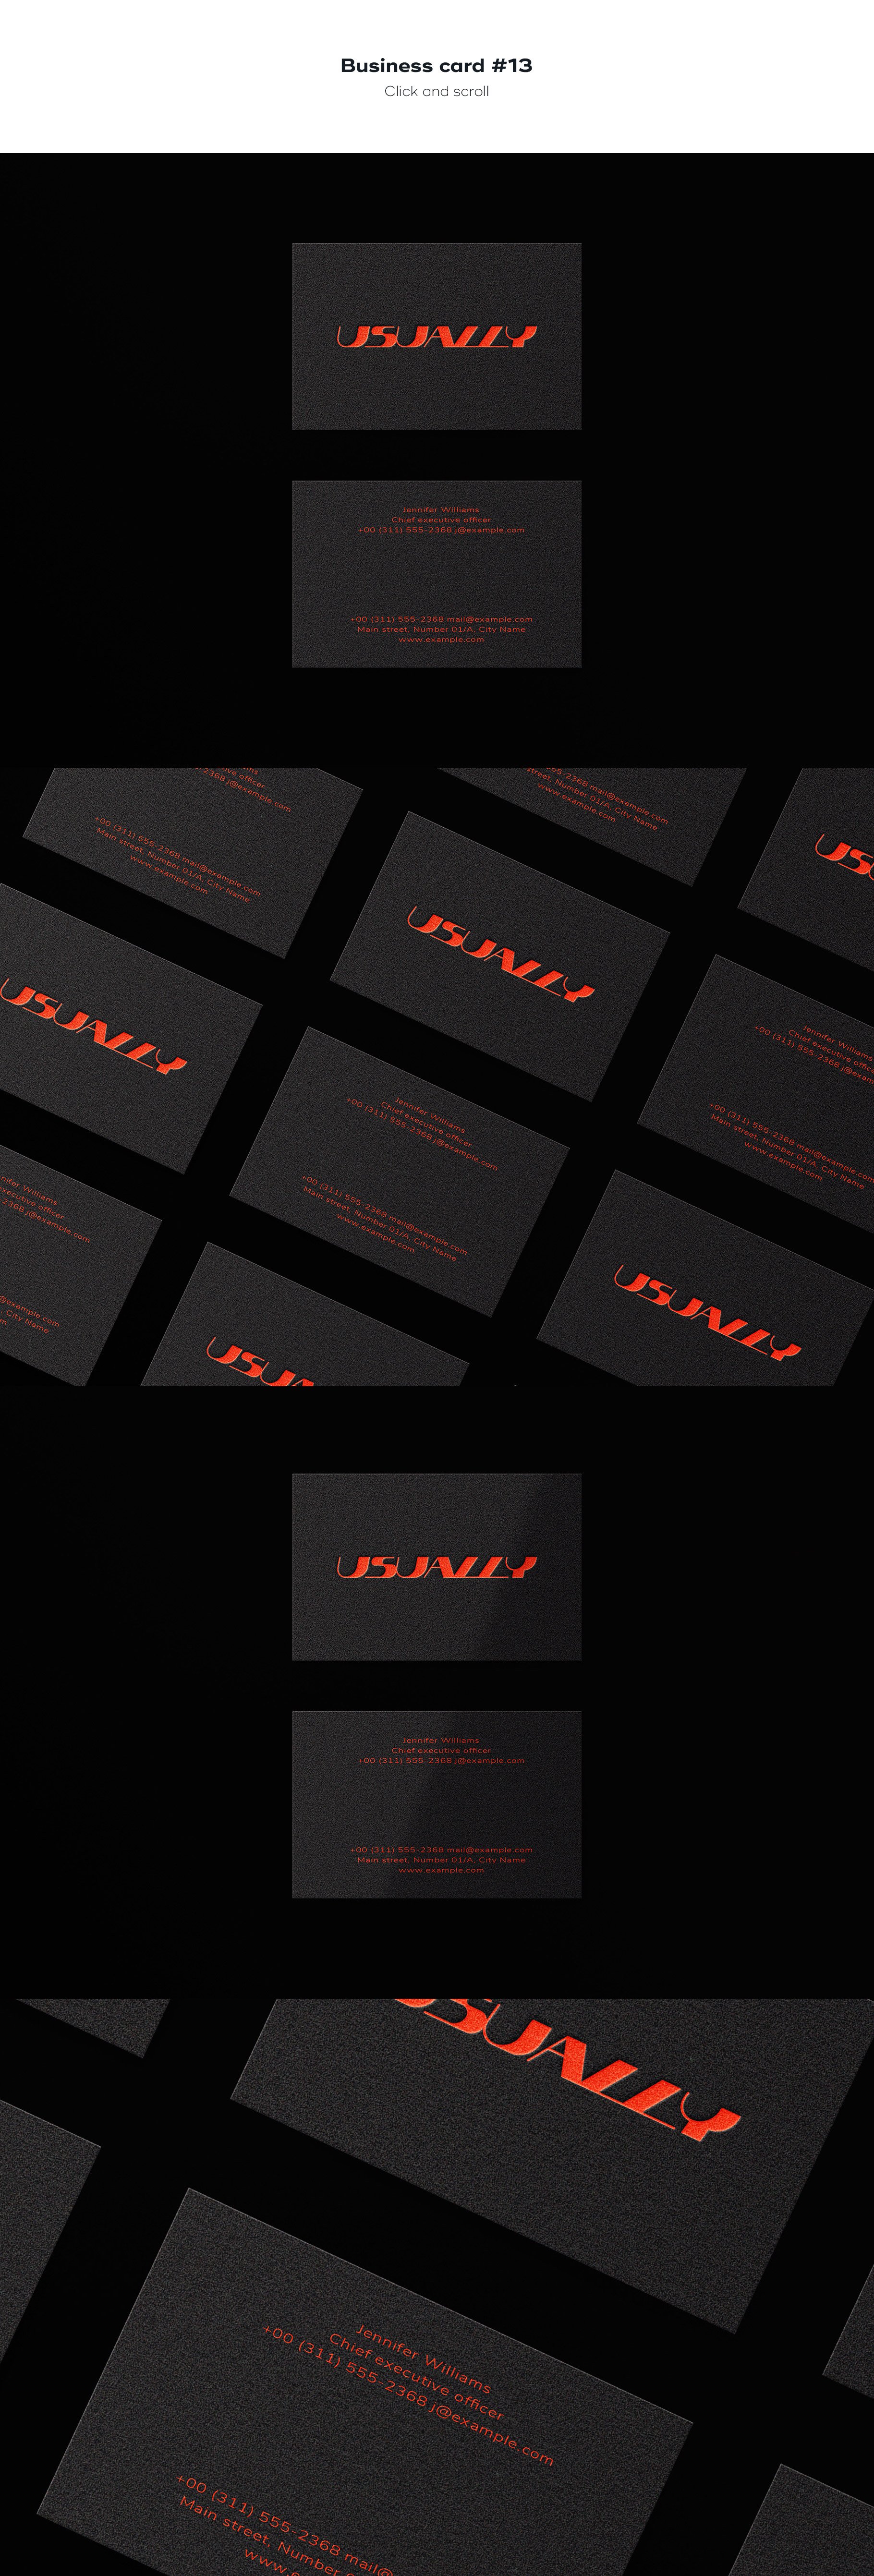 business card 13 282